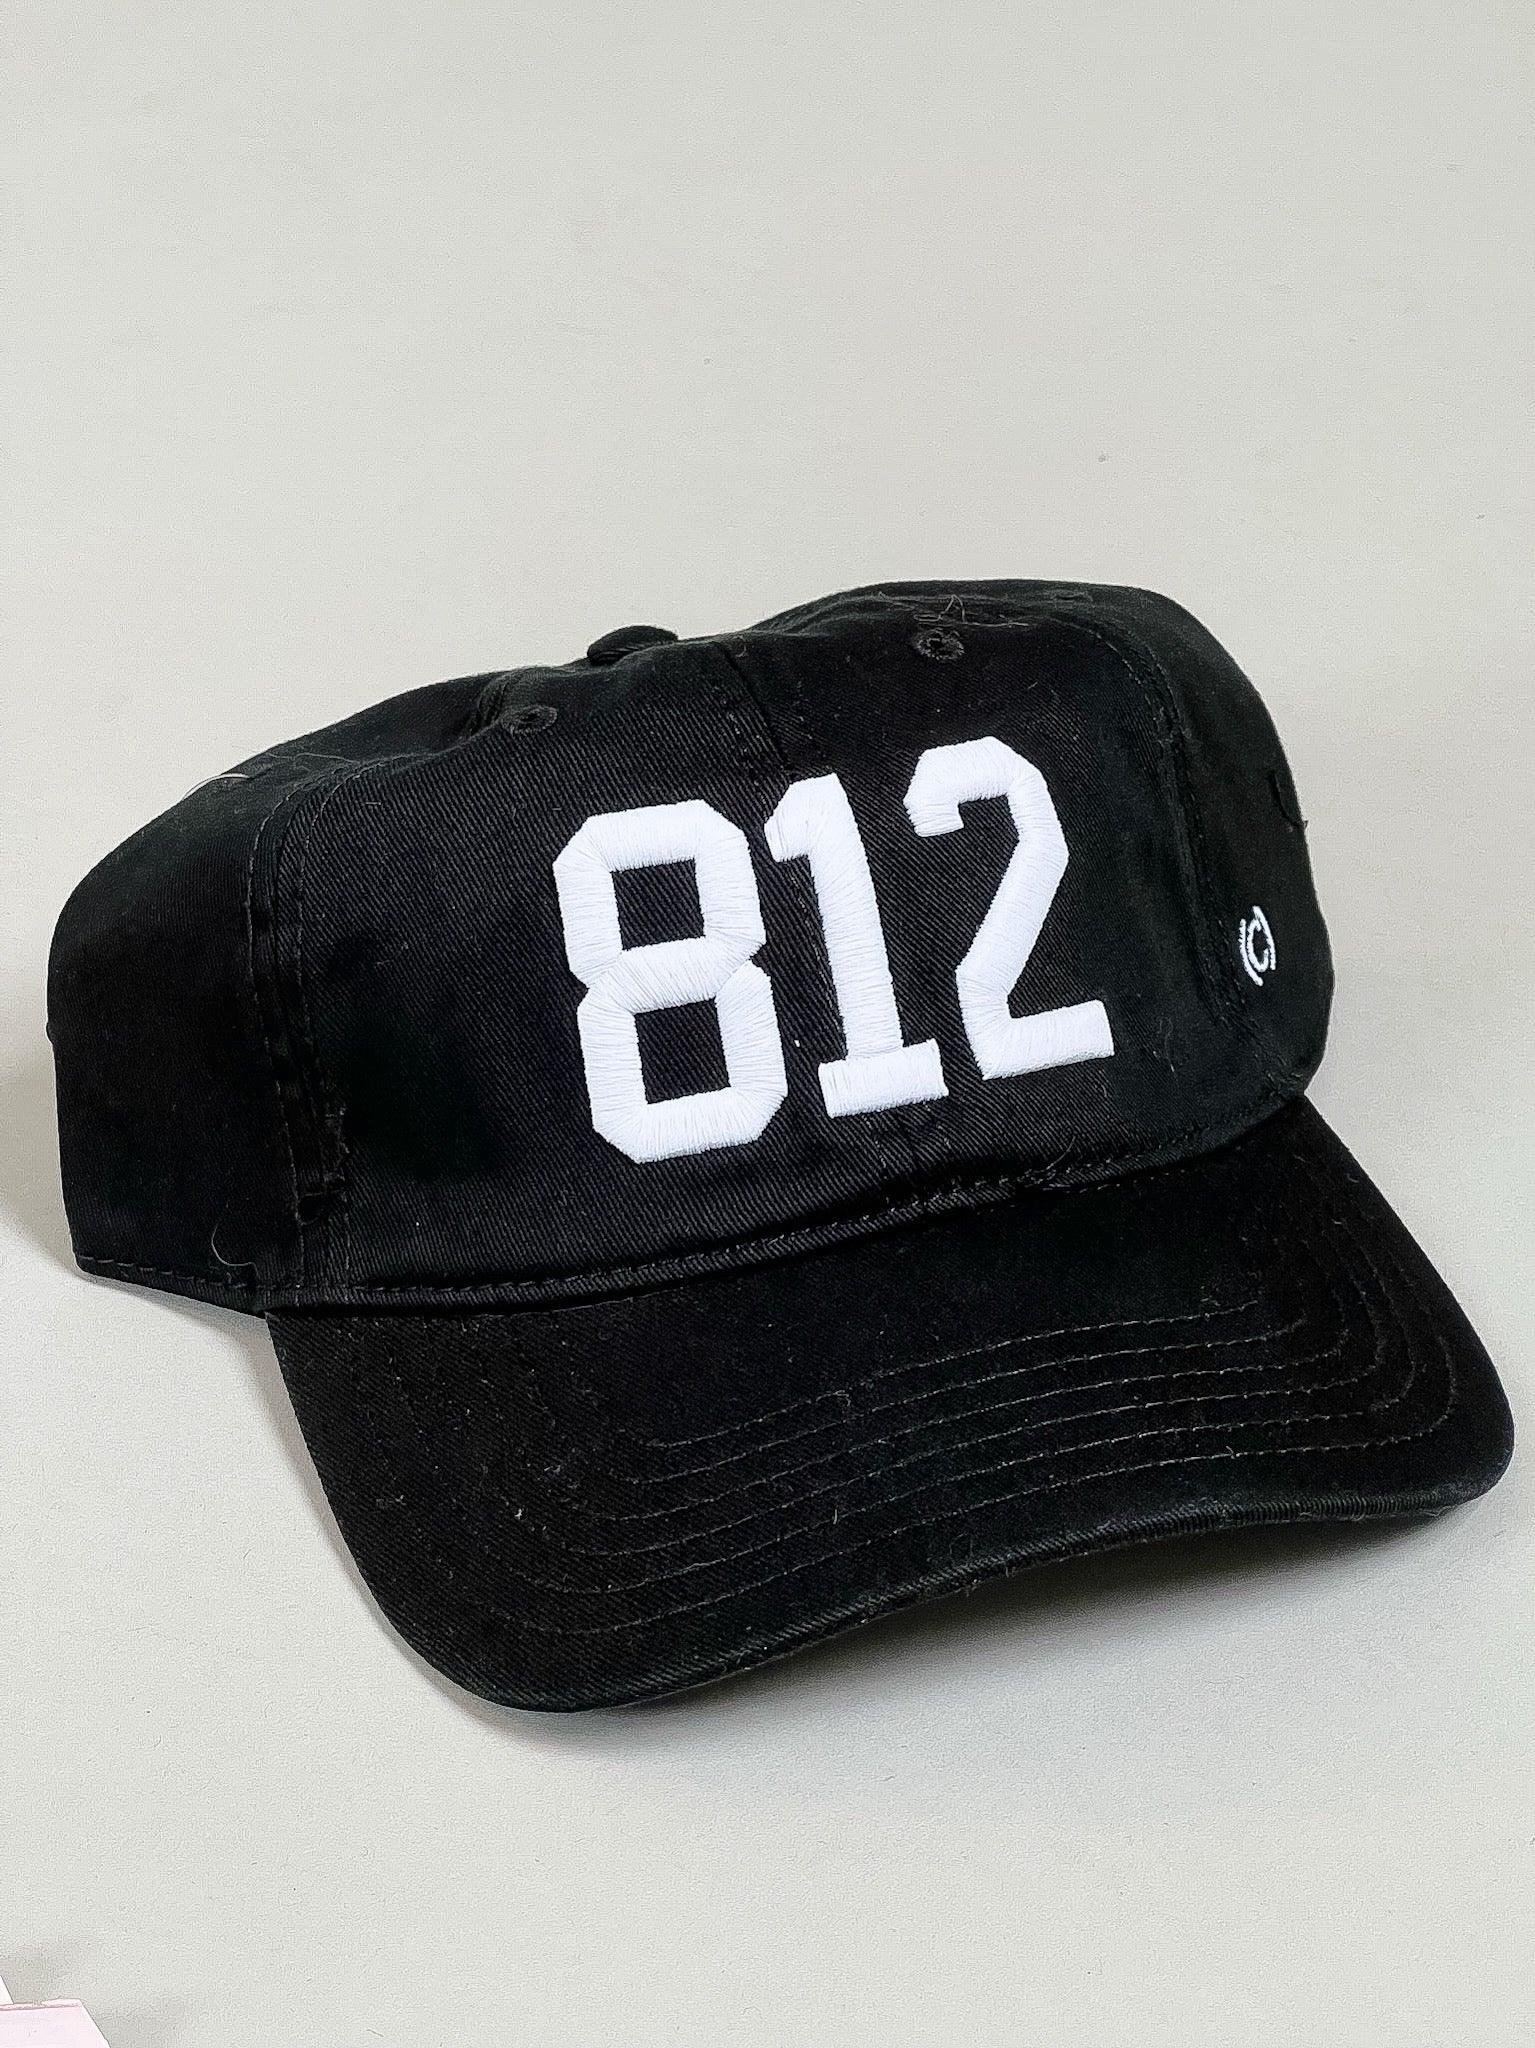 Represent the Hoosier state in the 812 dad hat, black with white stitching.